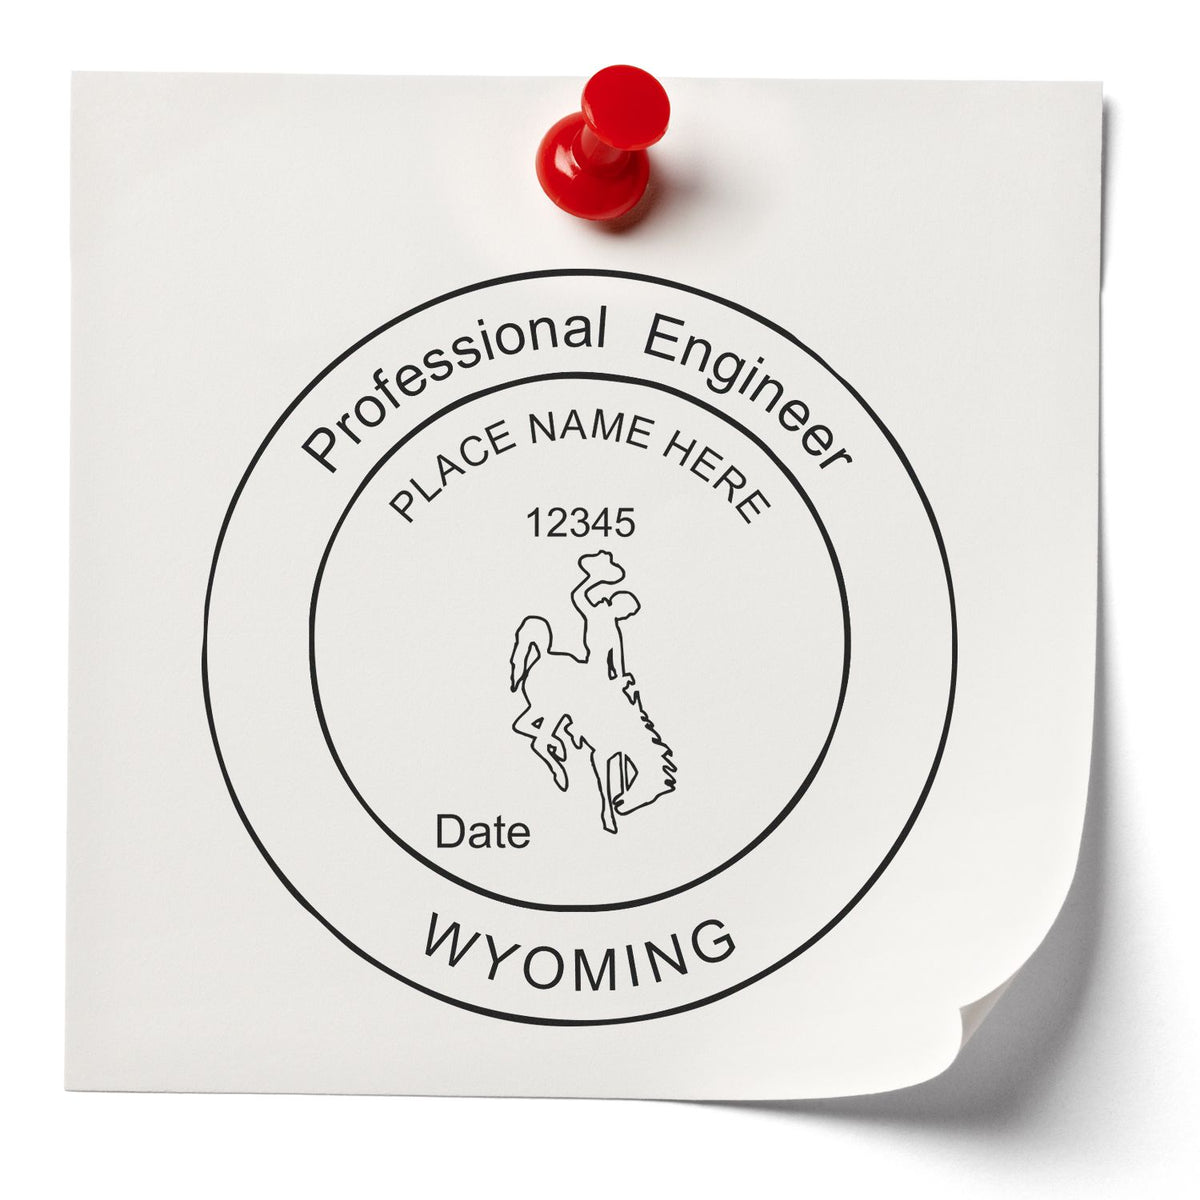 A stamped impression of the Self-Inking Wyoming PE Stamp in this stylish lifestyle photo, setting the tone for a unique and personalized product.